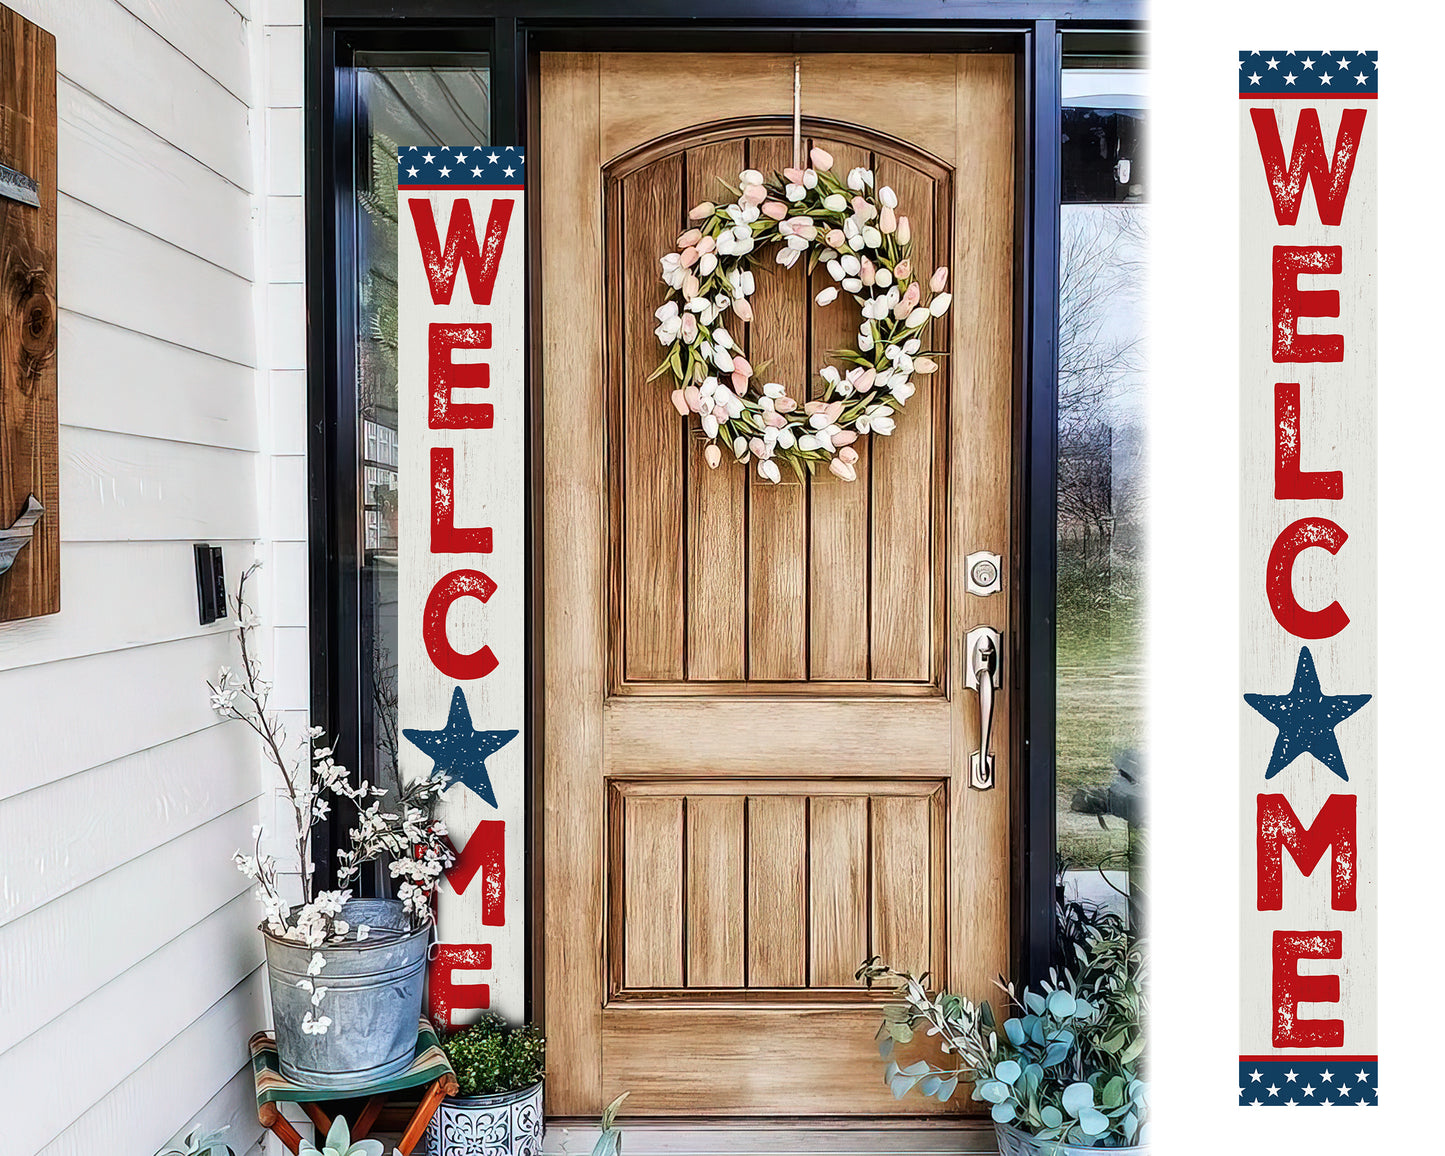 72in Welcome Porch Sign | 4th Of July Porch Decor | Farmhouse Decor for Porch | Independence Day Outdoor Decor